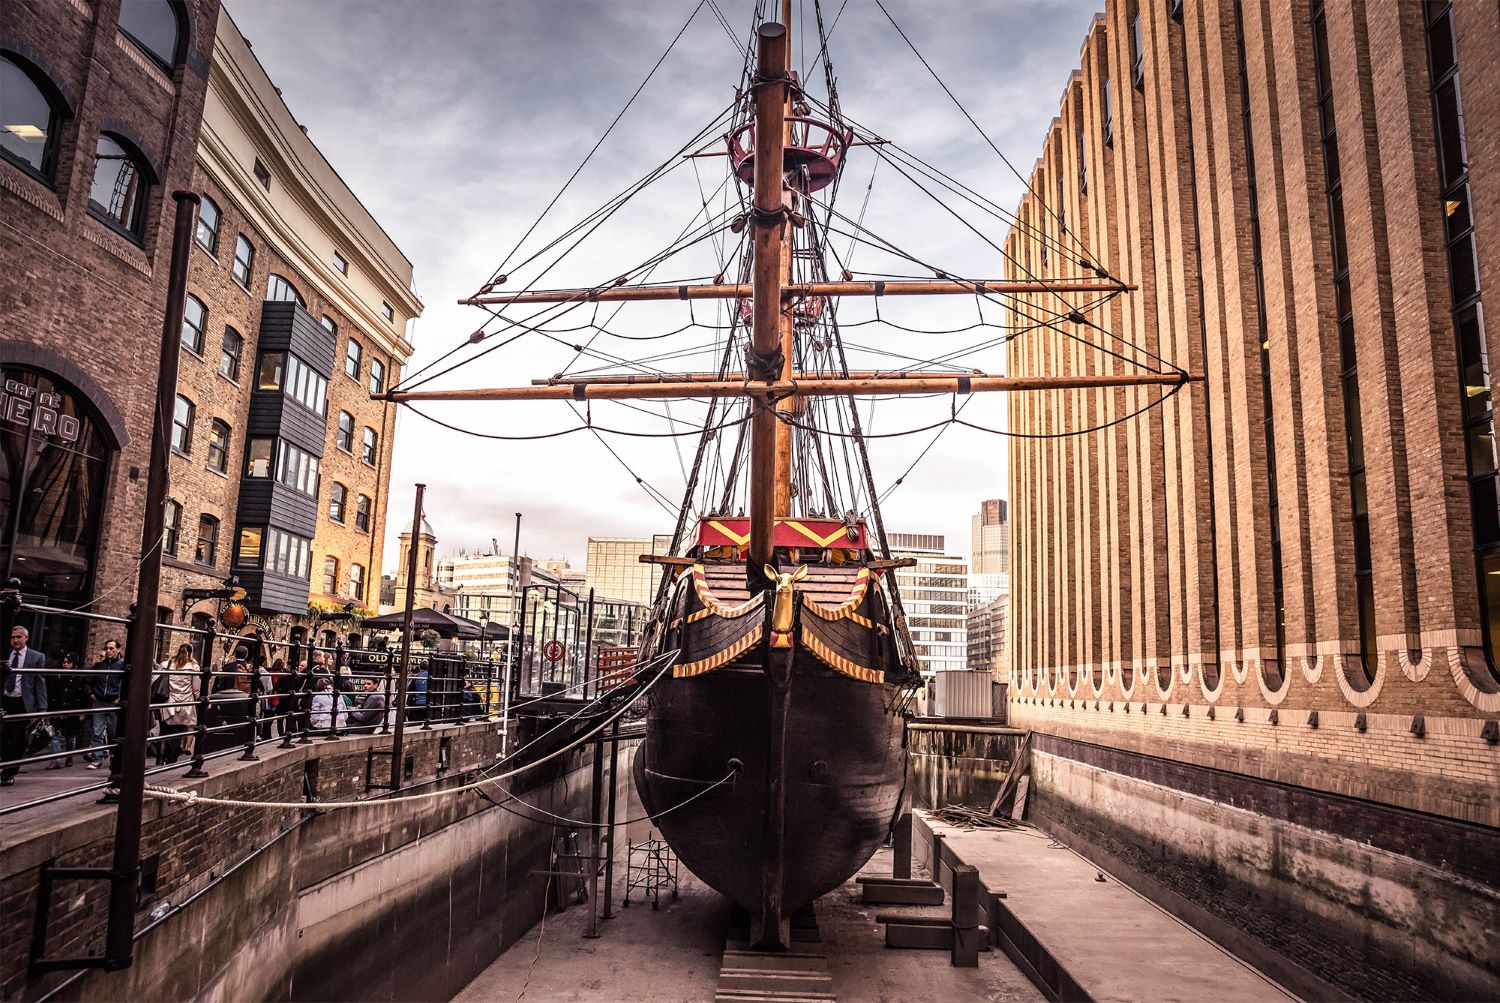 The Golden Hinde Secures Grant for Mizzen Mast Replacement